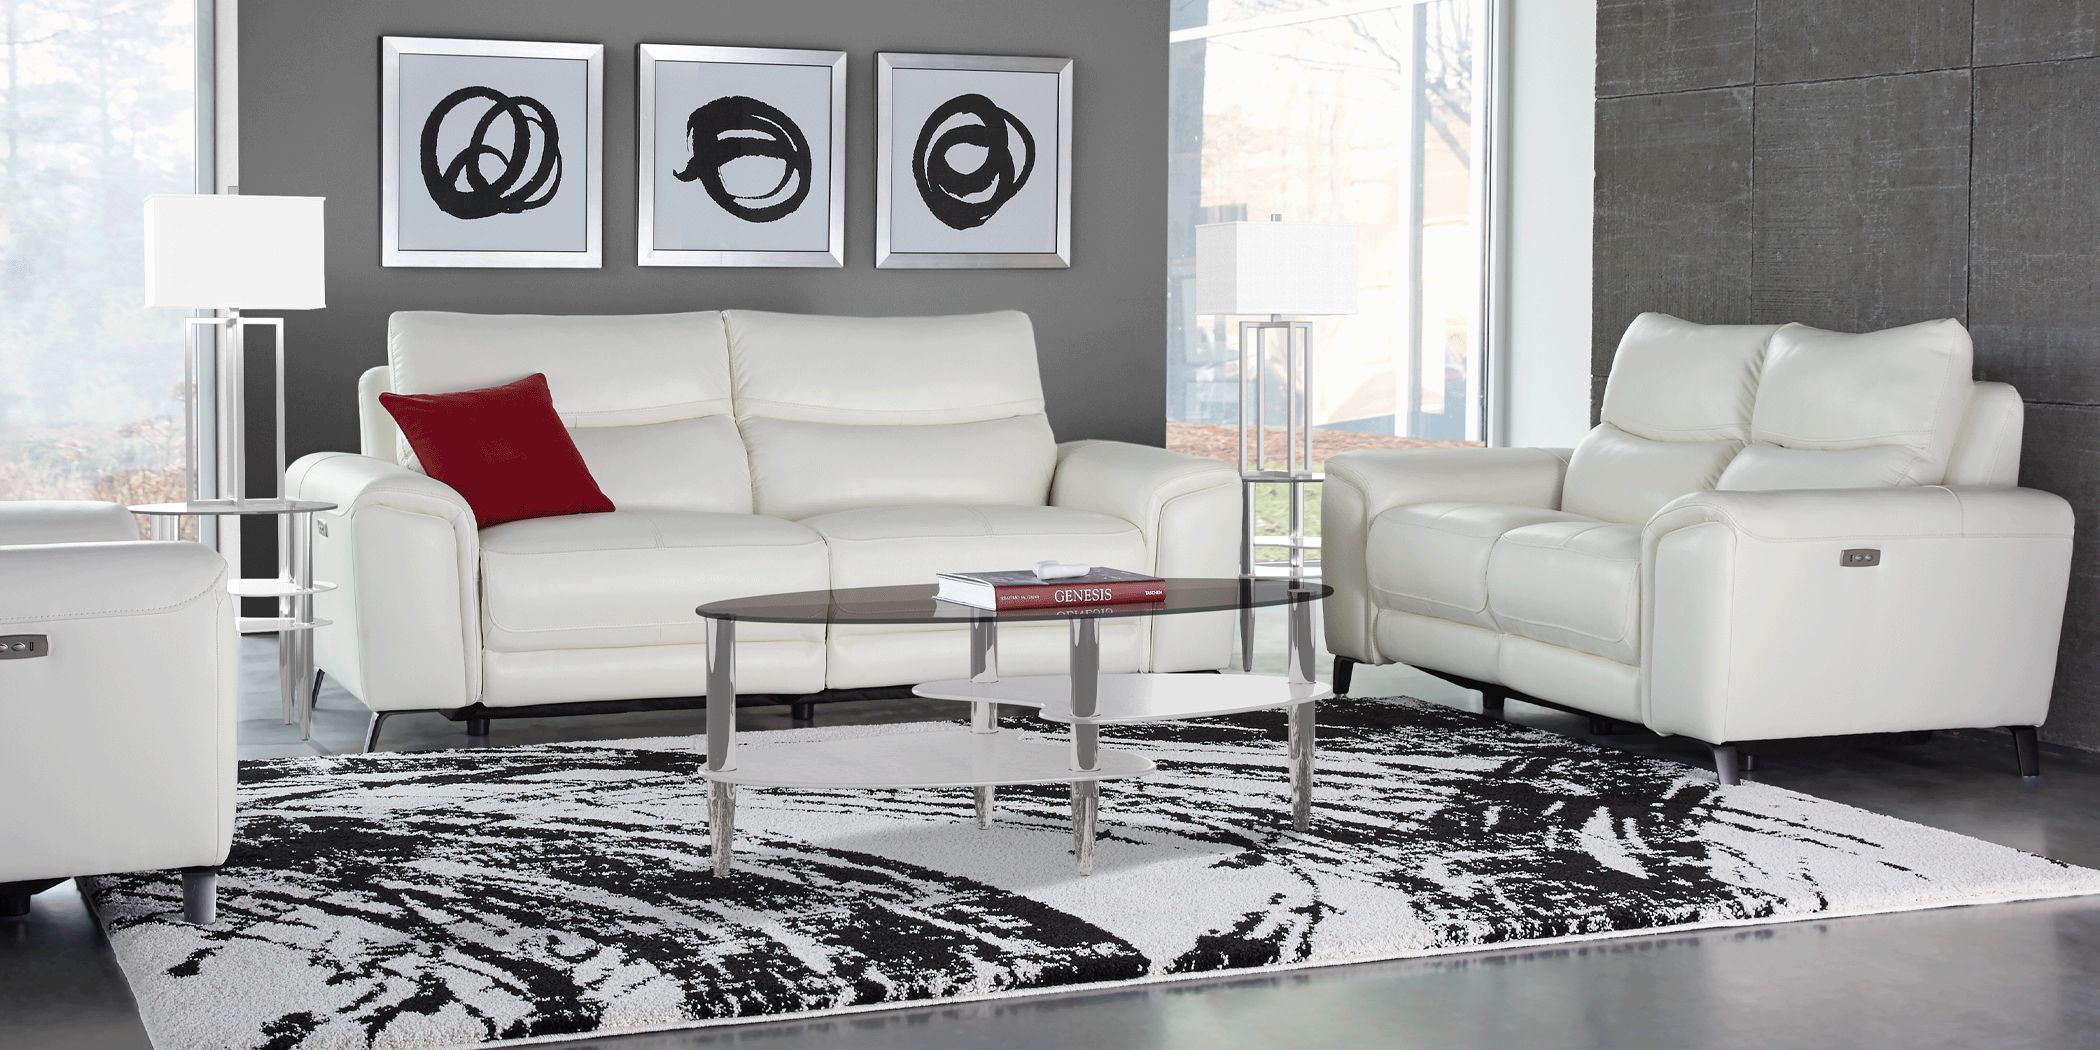 White Leather Living Room Sets, White Leather Living Room Sets